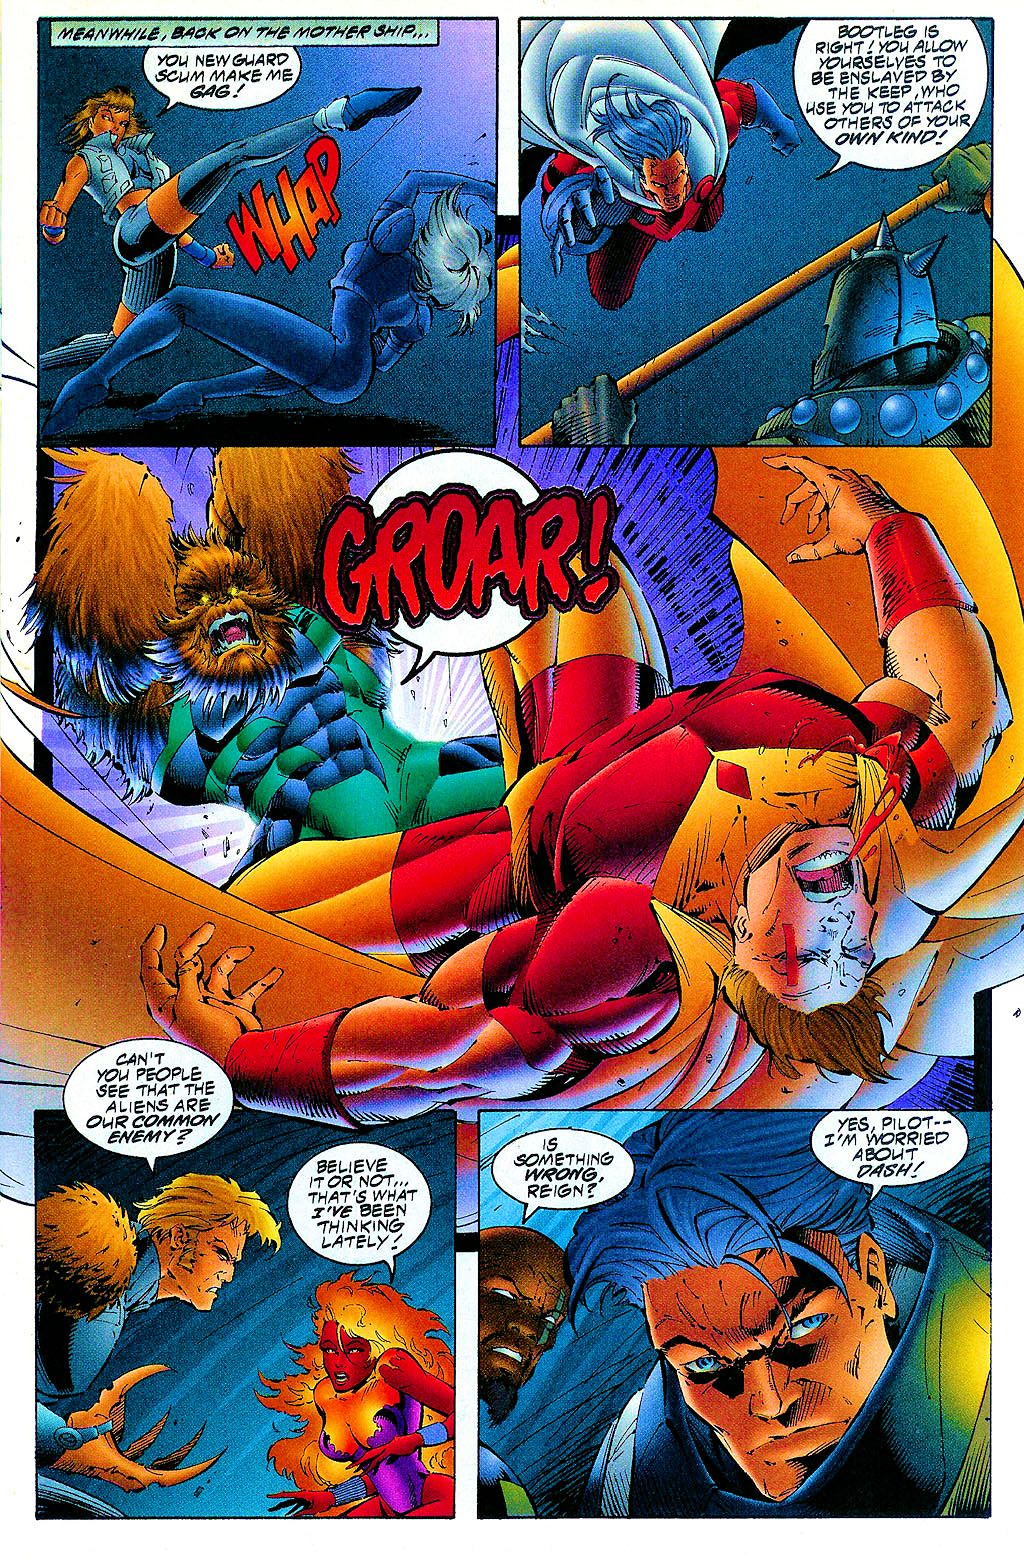 Read online Extreme Destroyer comic -  Issue # Issue Epilogue - 10